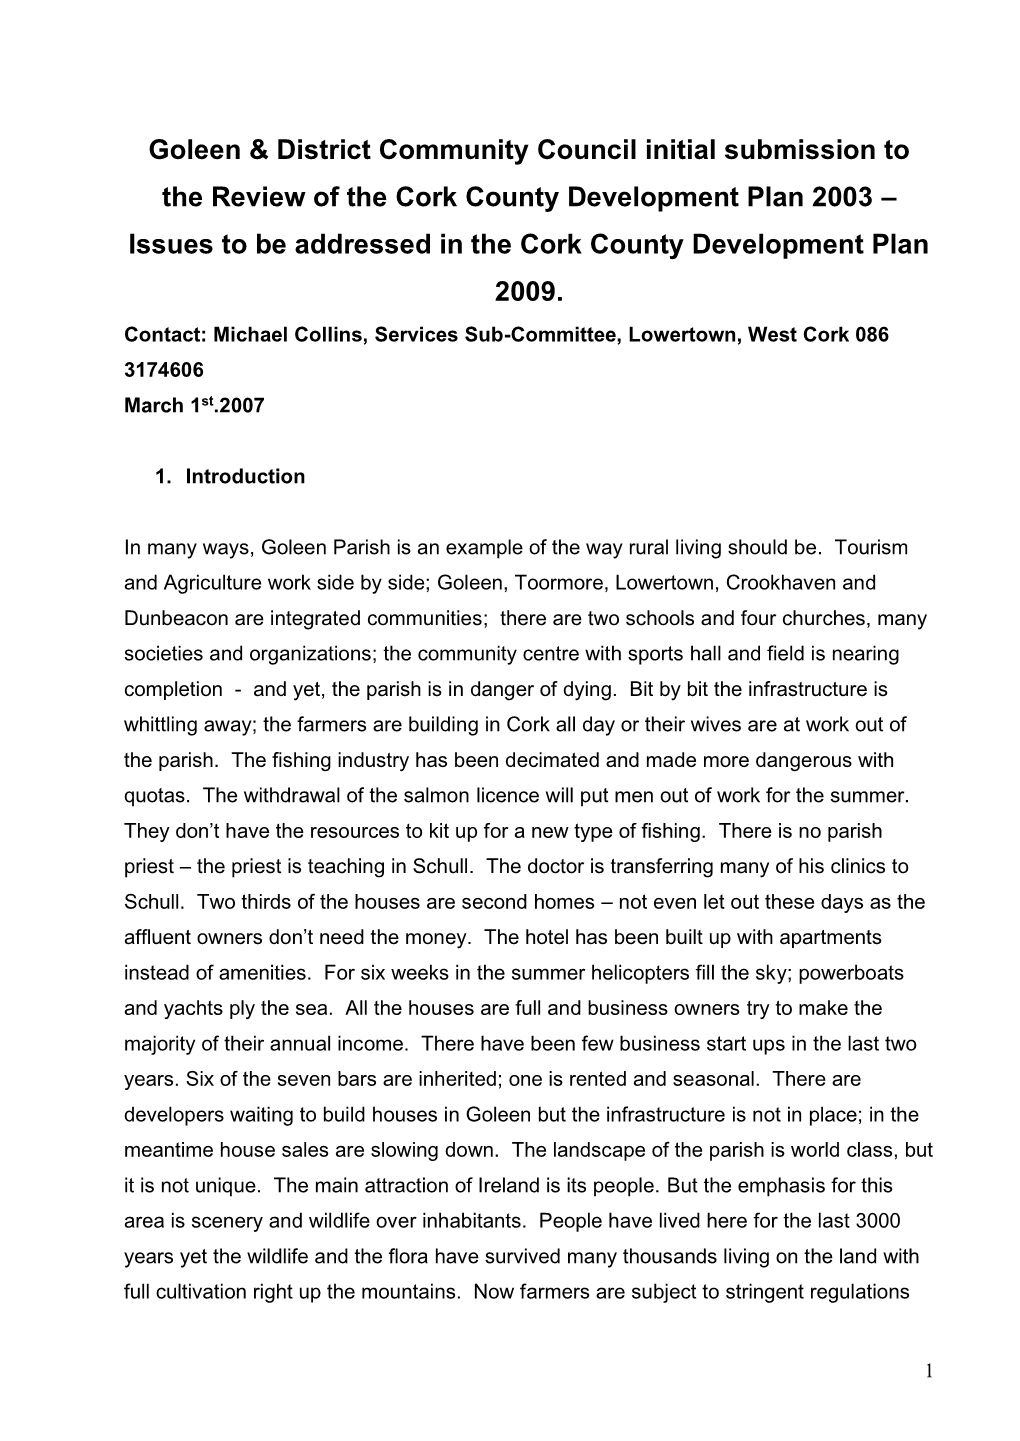 Cork County Plan Issues 2009